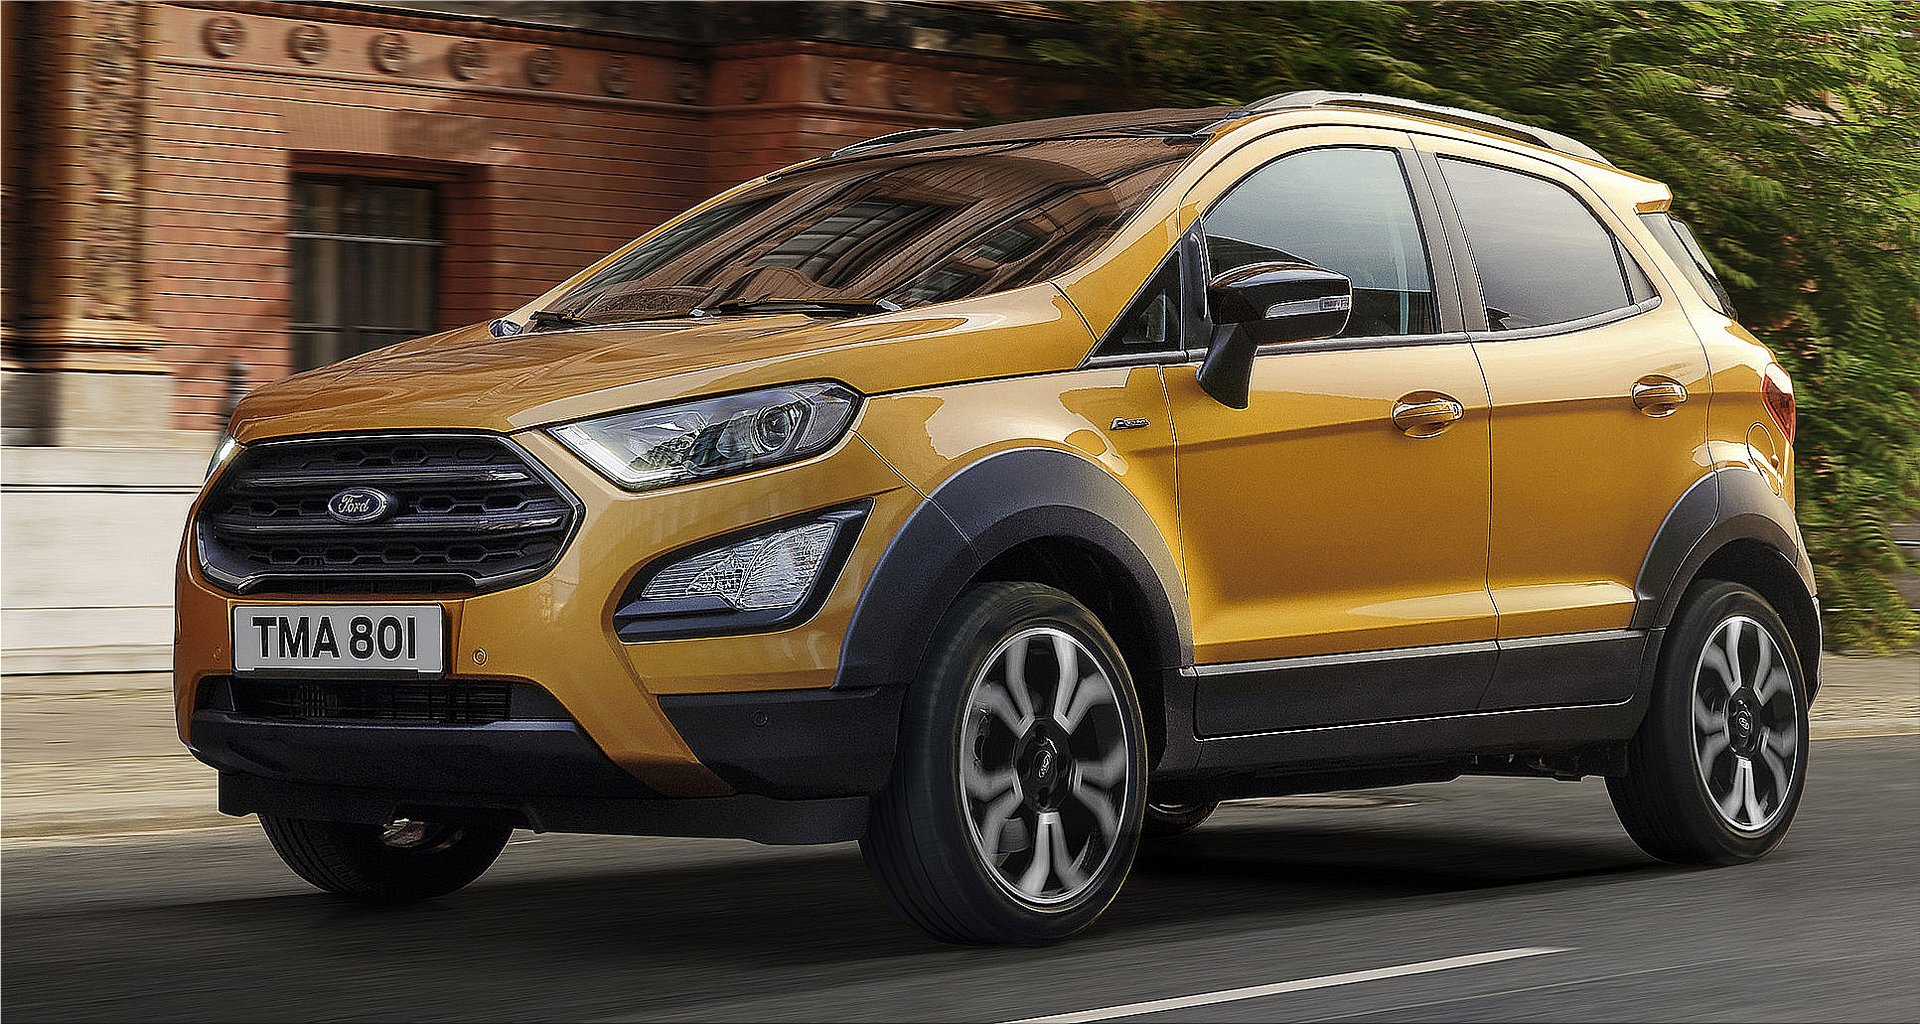 The new Ford Ecosport in now "Active" Car Division